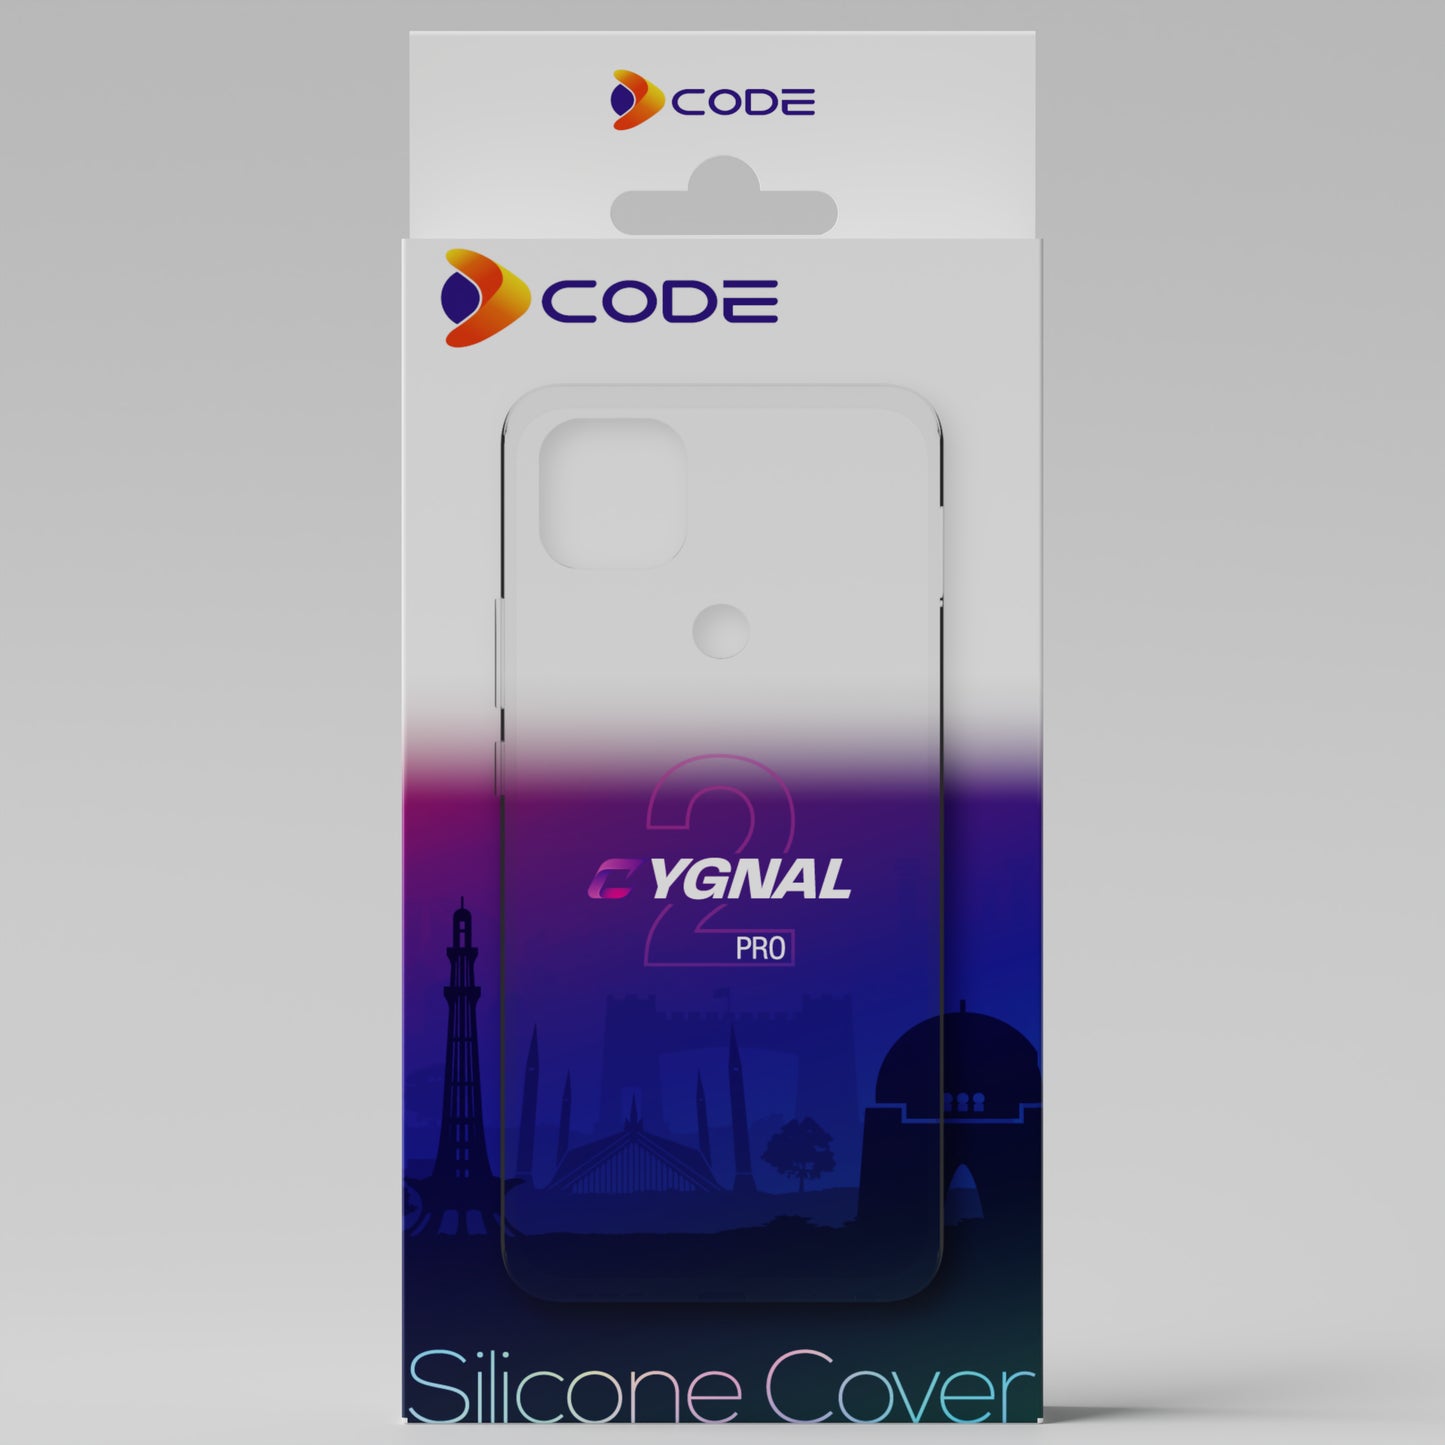 Protective phone cover - Cygnal 2 Pro